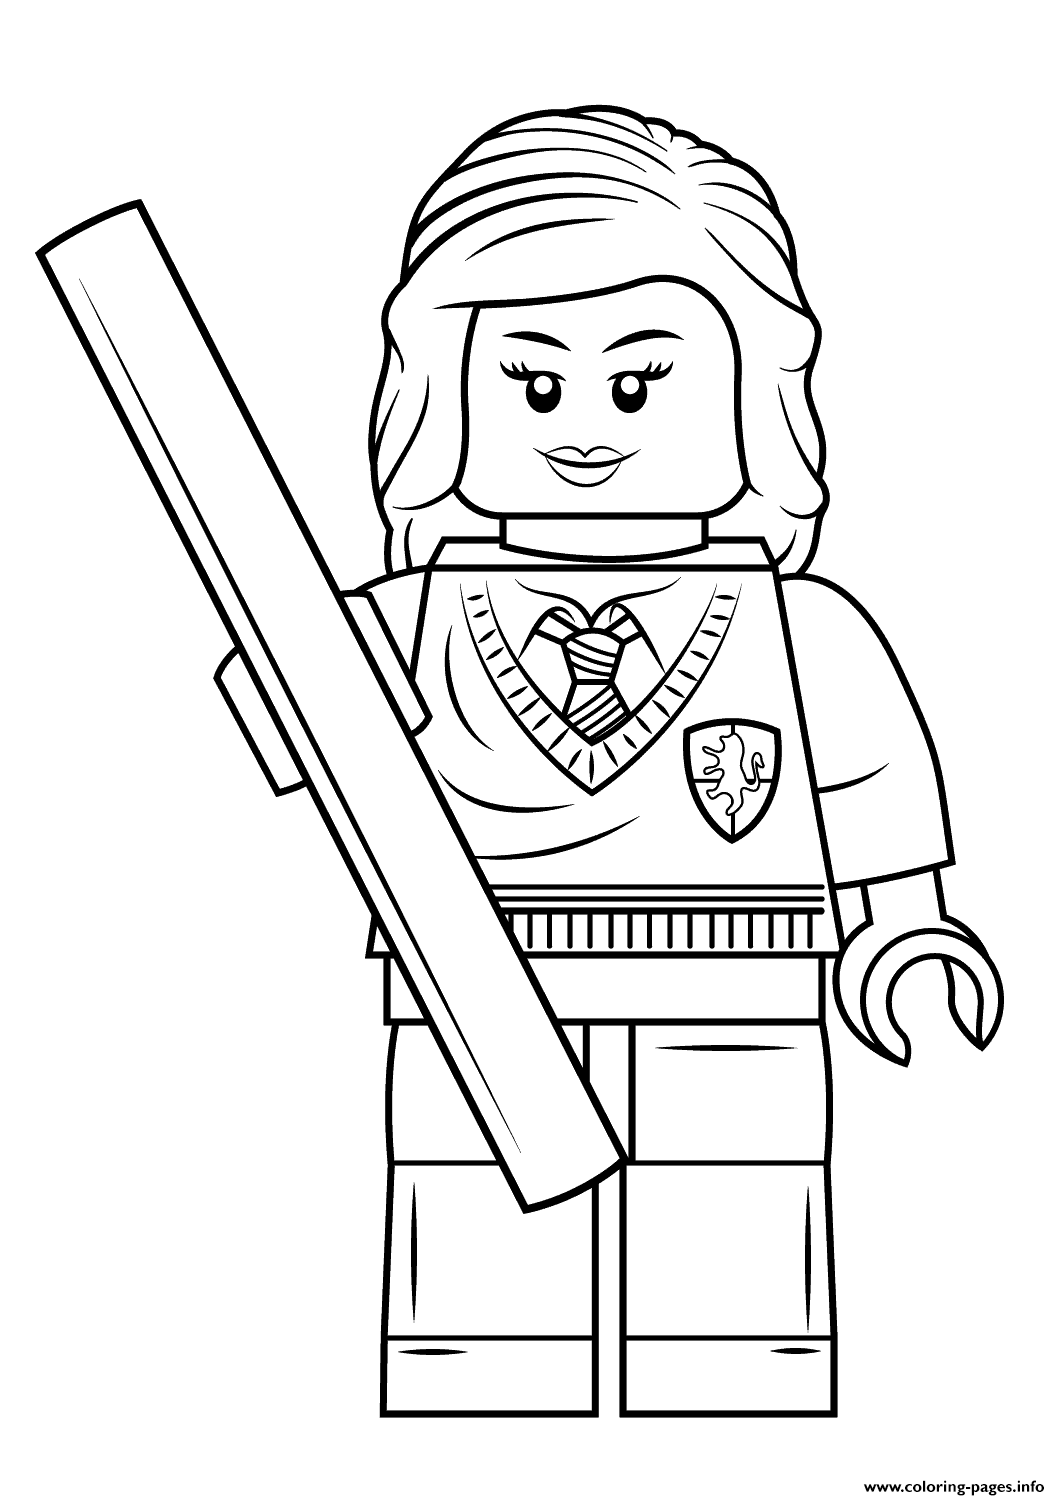 Print lego hermione granger harry potter coloring pages | Harry ...